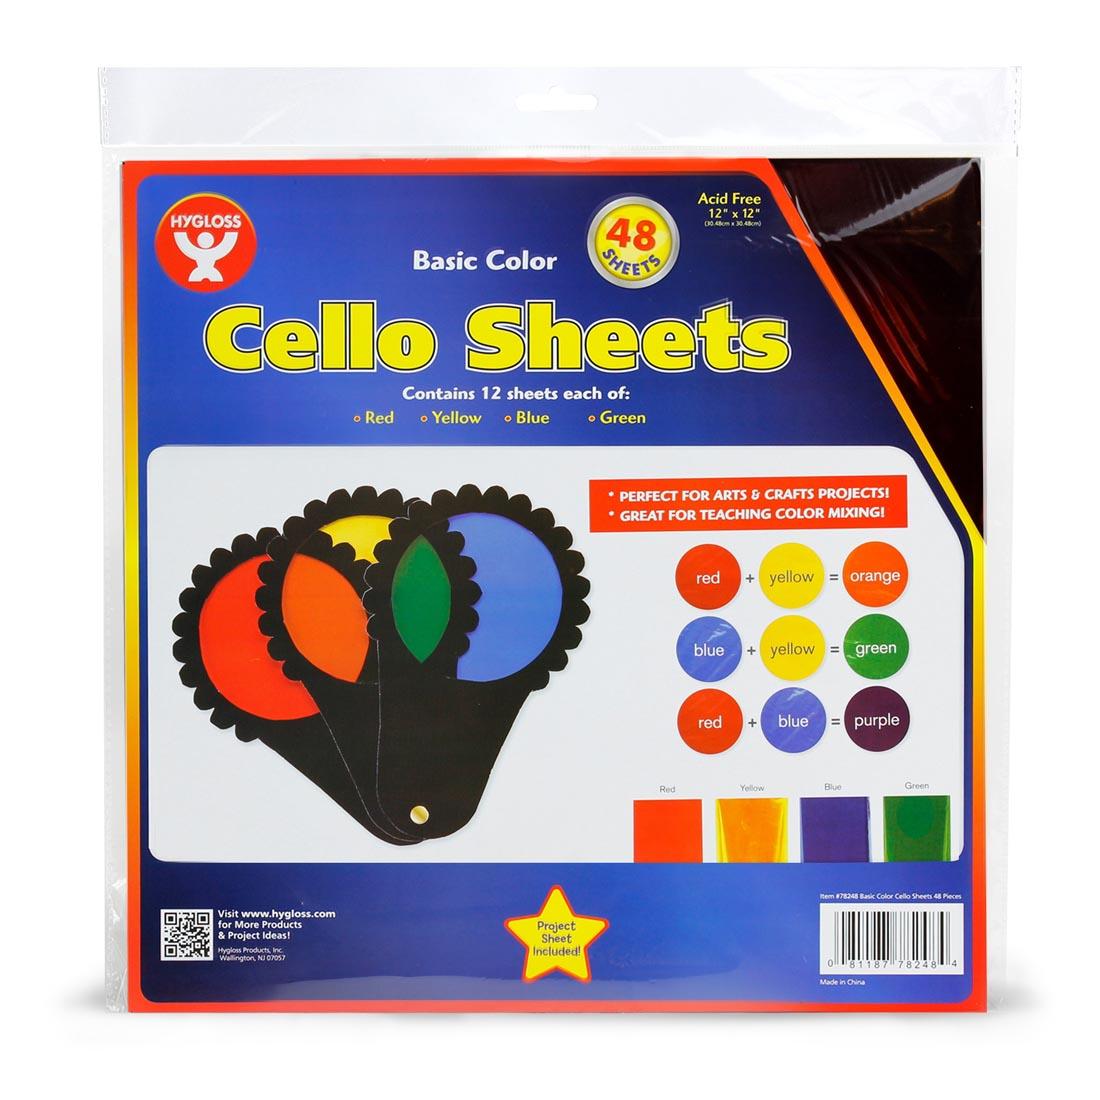 package of Hygloss Basic Color Cello Sheets